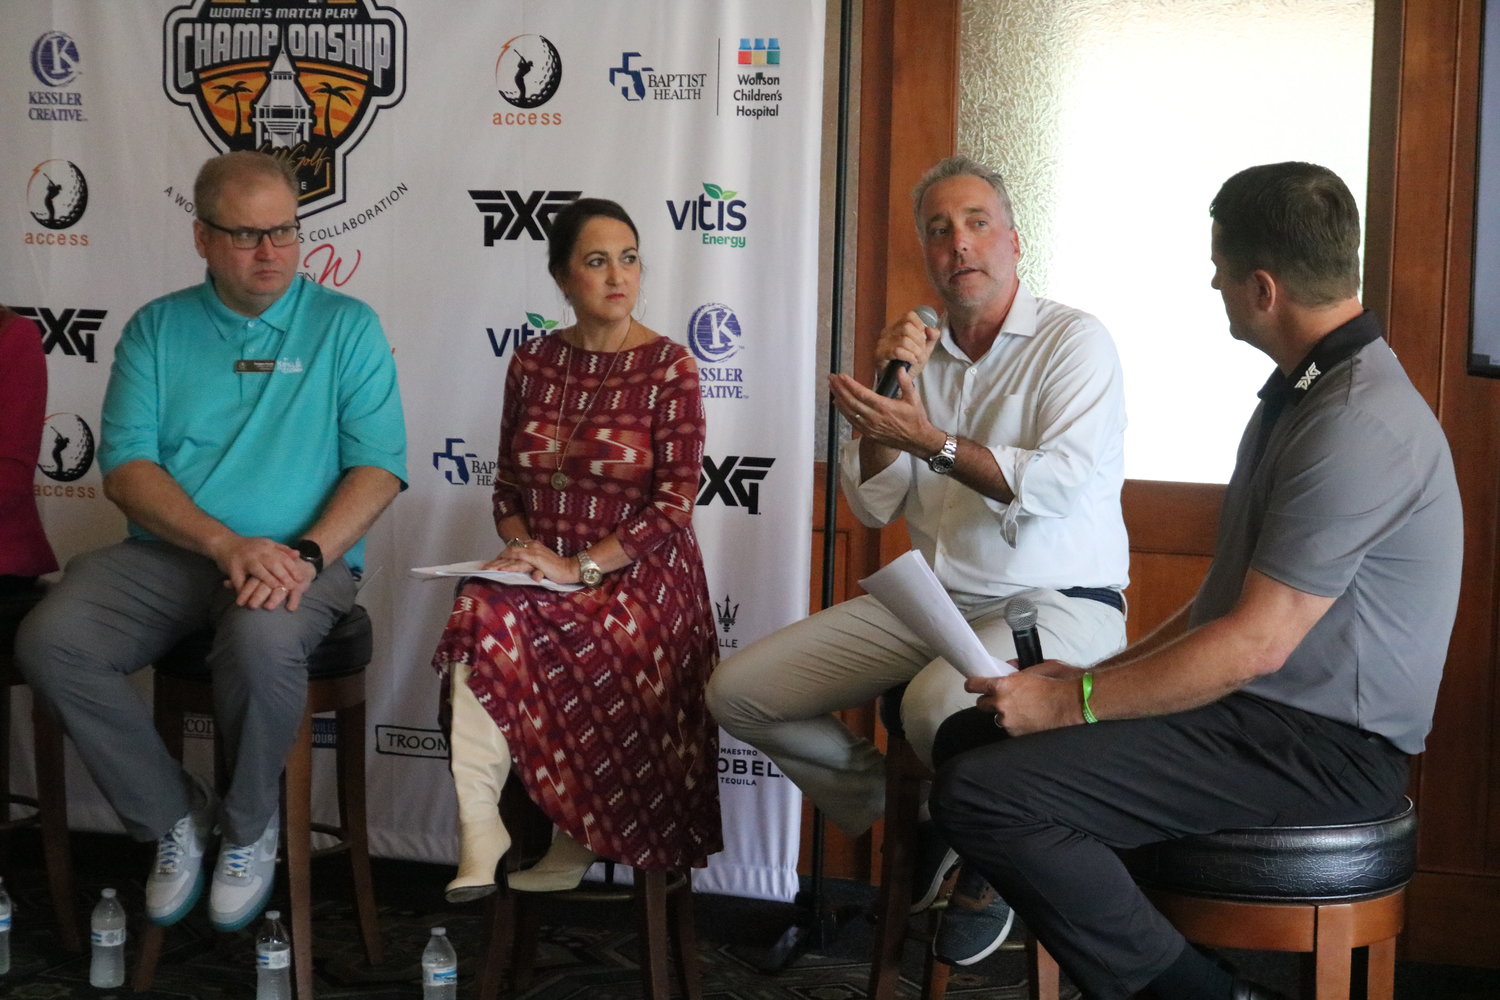 PXG Women’s Match Play Championship founder Mark Berman speaks about this year’s tournament during a media day event Sept. 23.